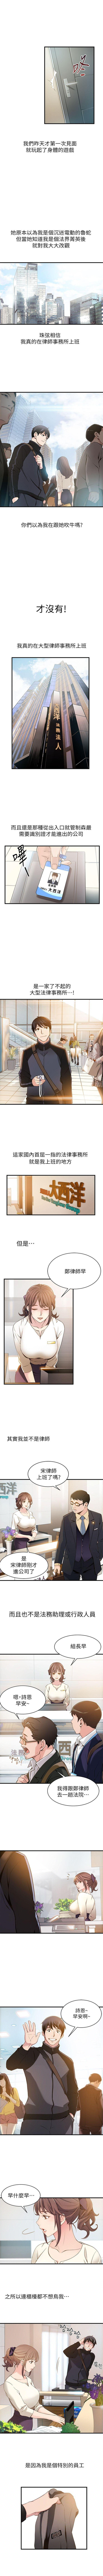 Thot 弱點 1-94 官方中文（連載中） Uncensored - Page 4